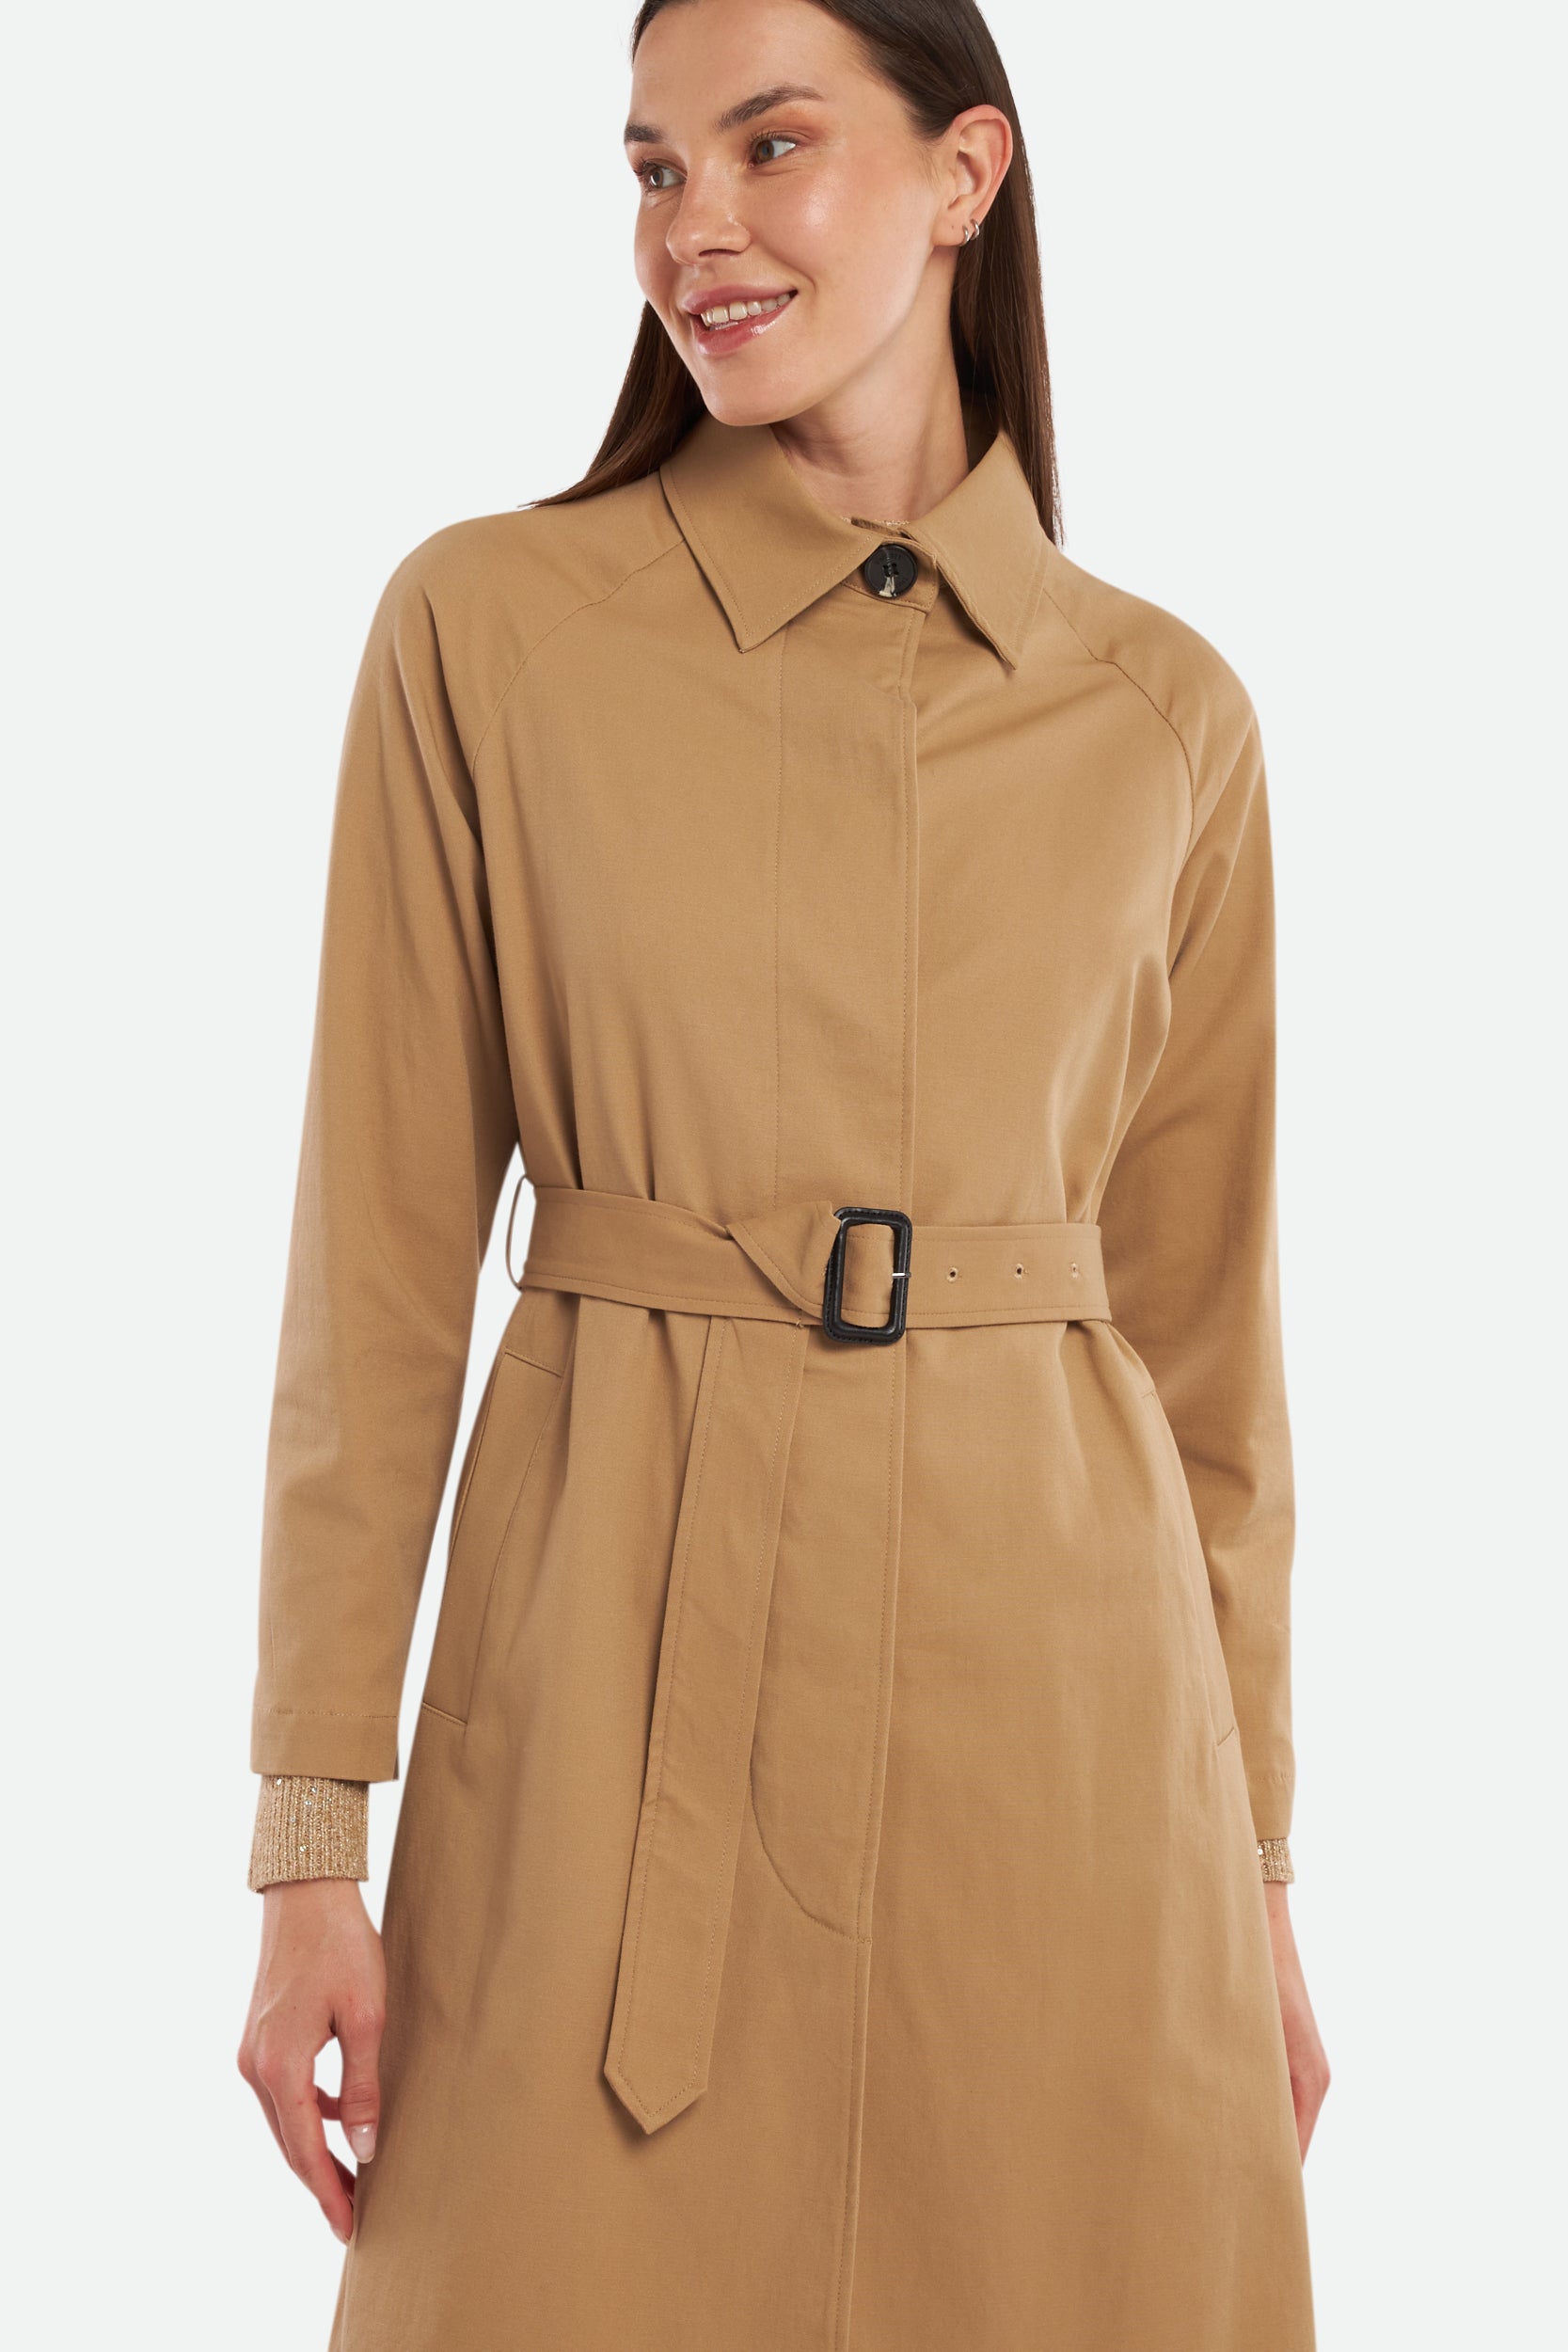 Twinset Trench Nude